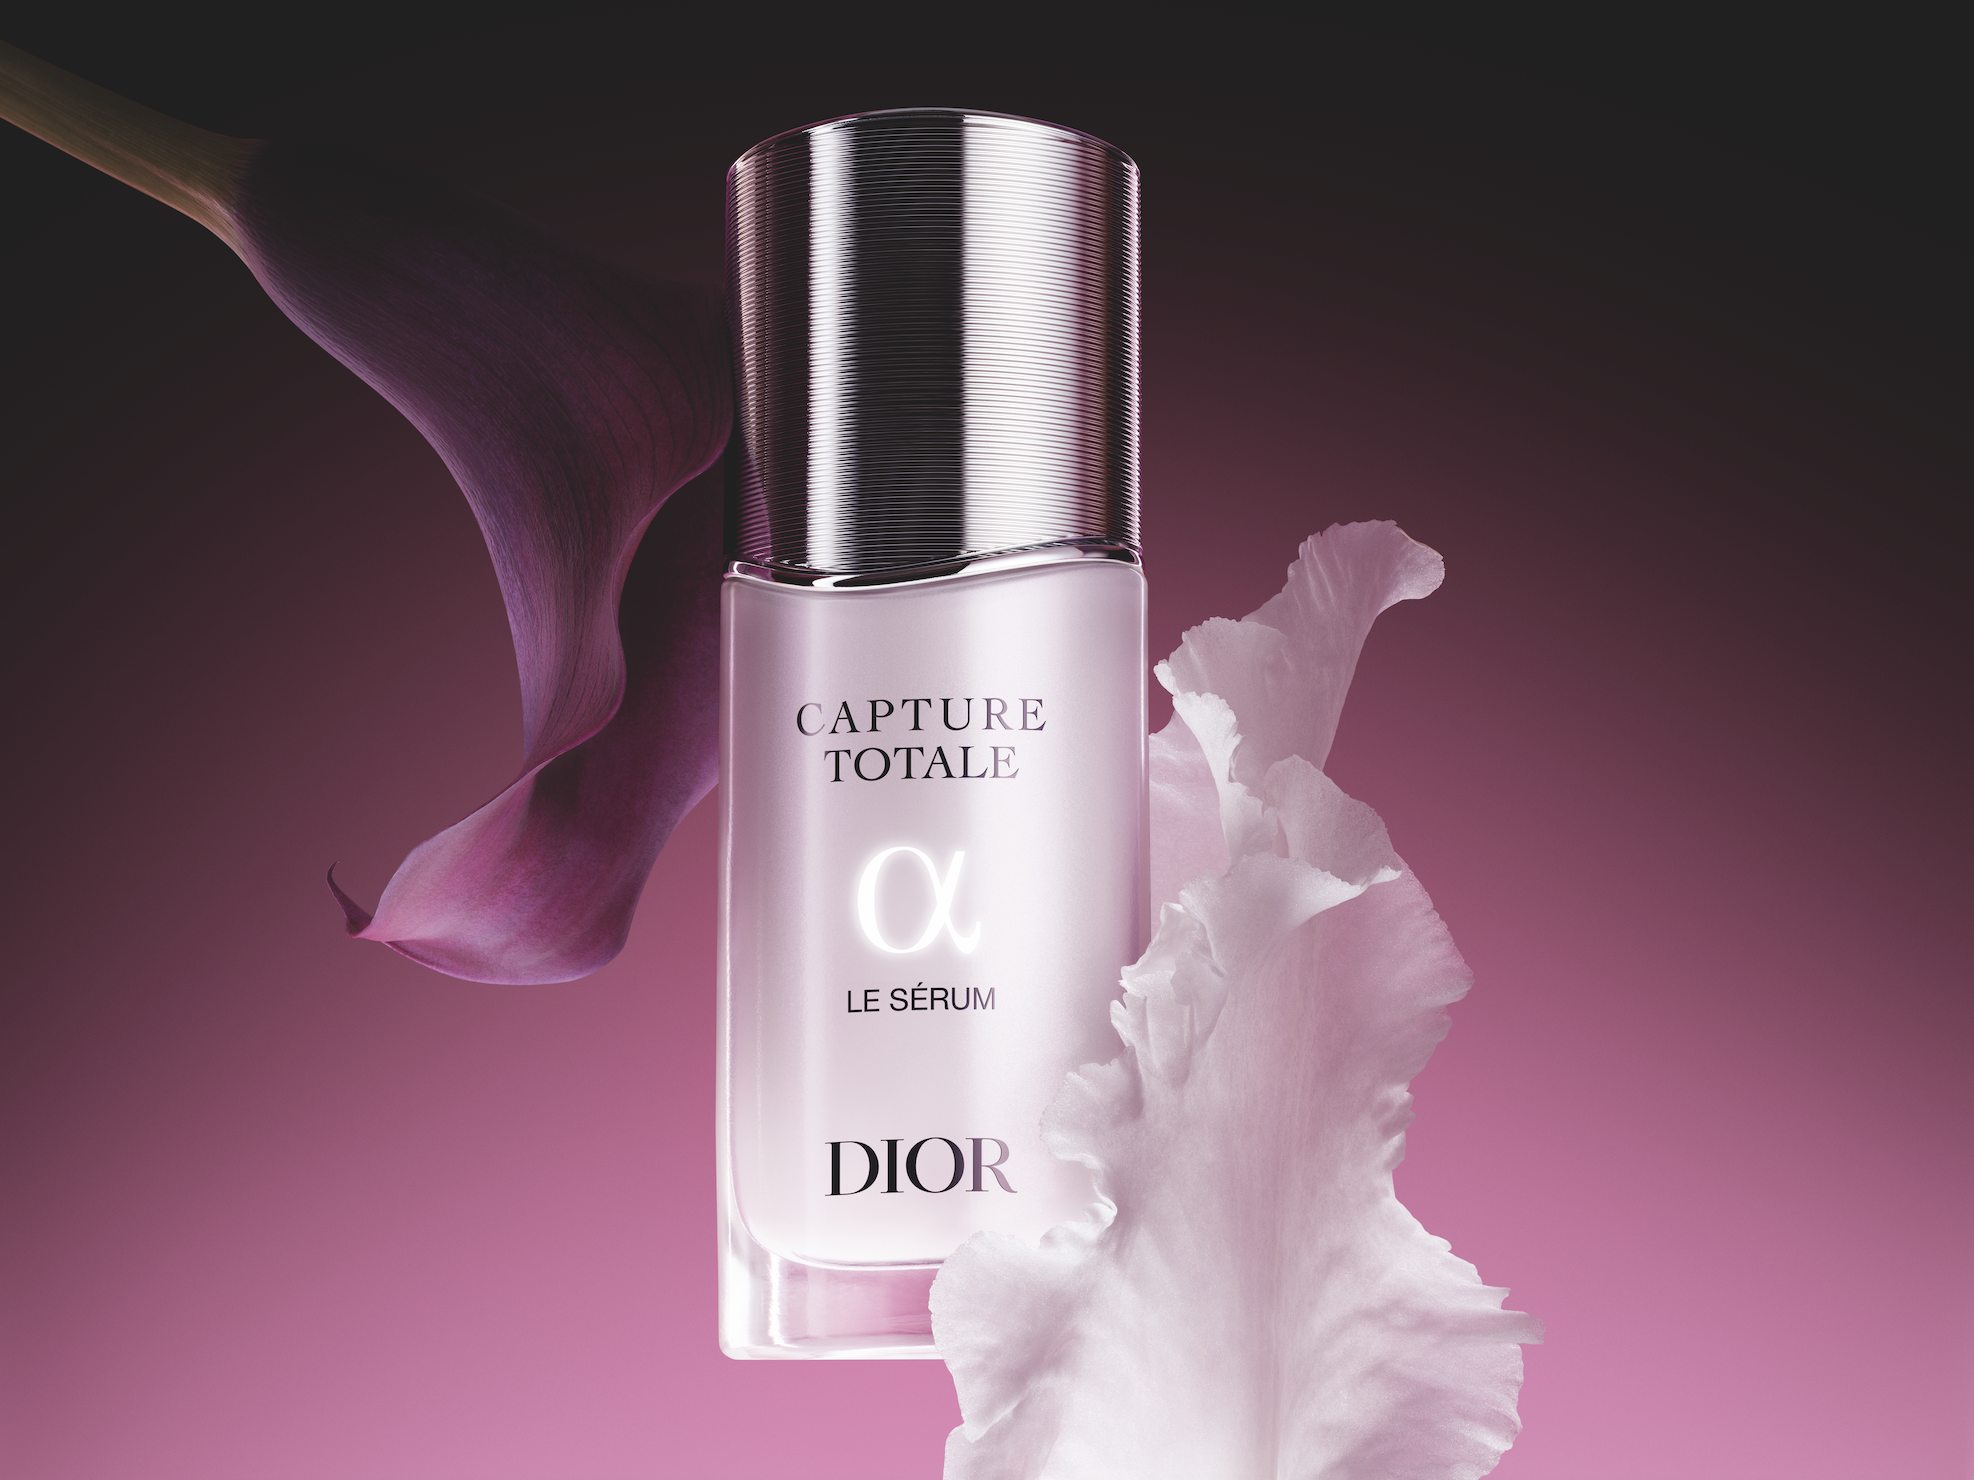 The Best Dior Skincare Products That Dermatologists Recommend